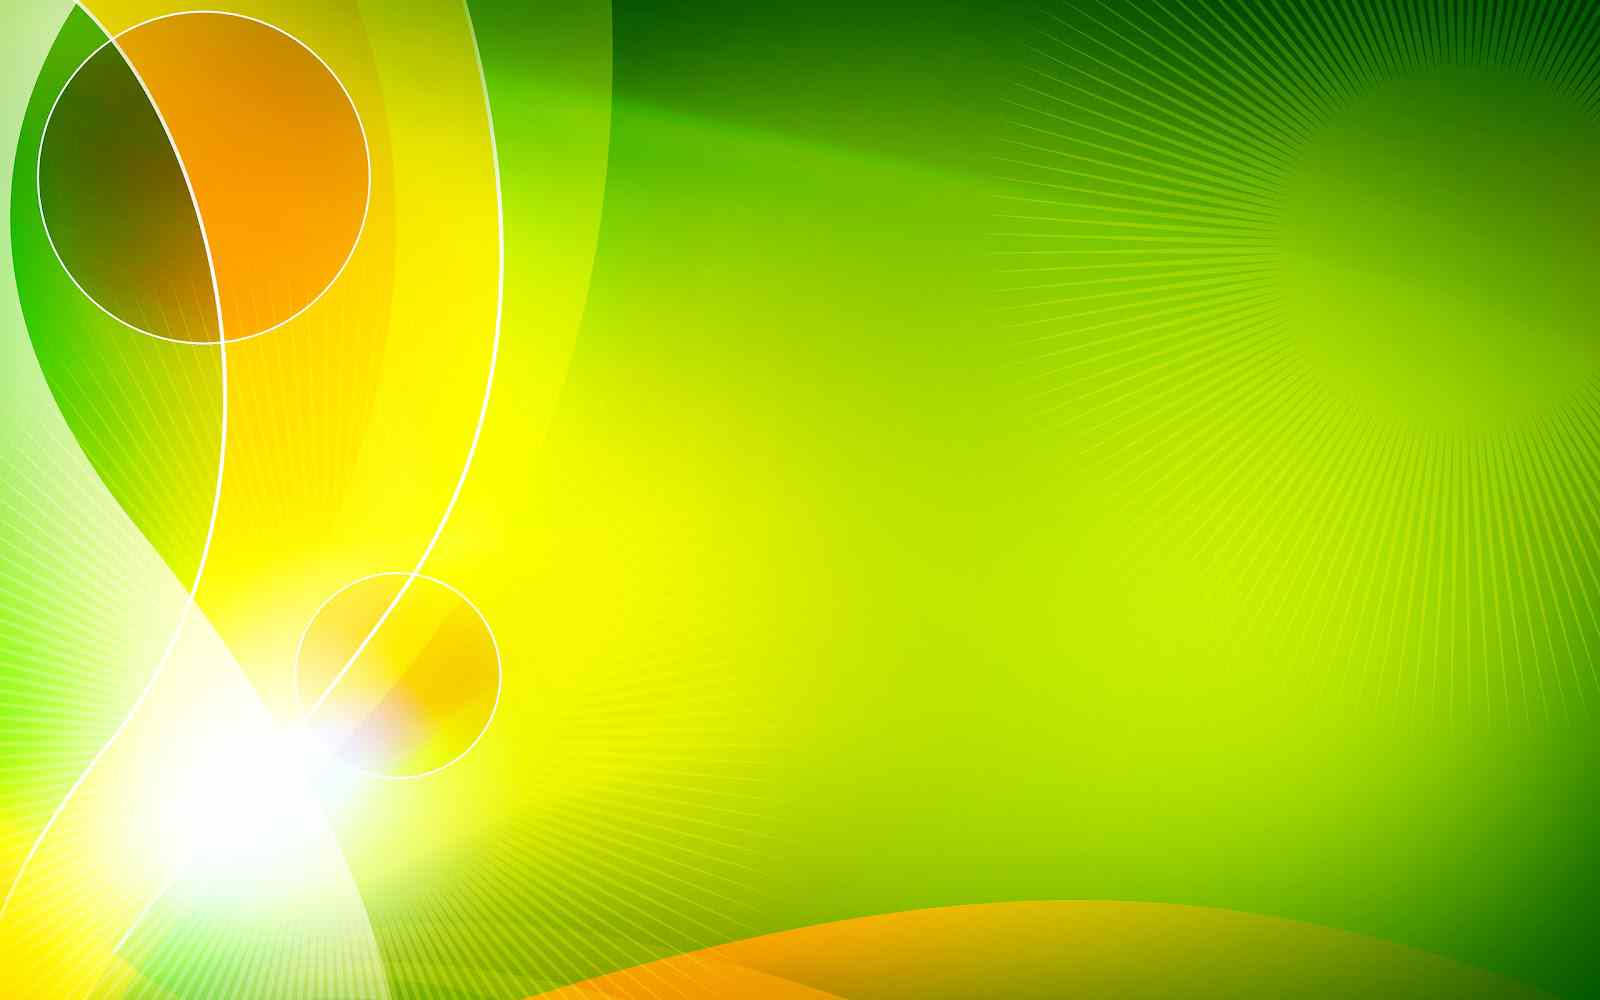 Abstract yellow green background wallpaper.